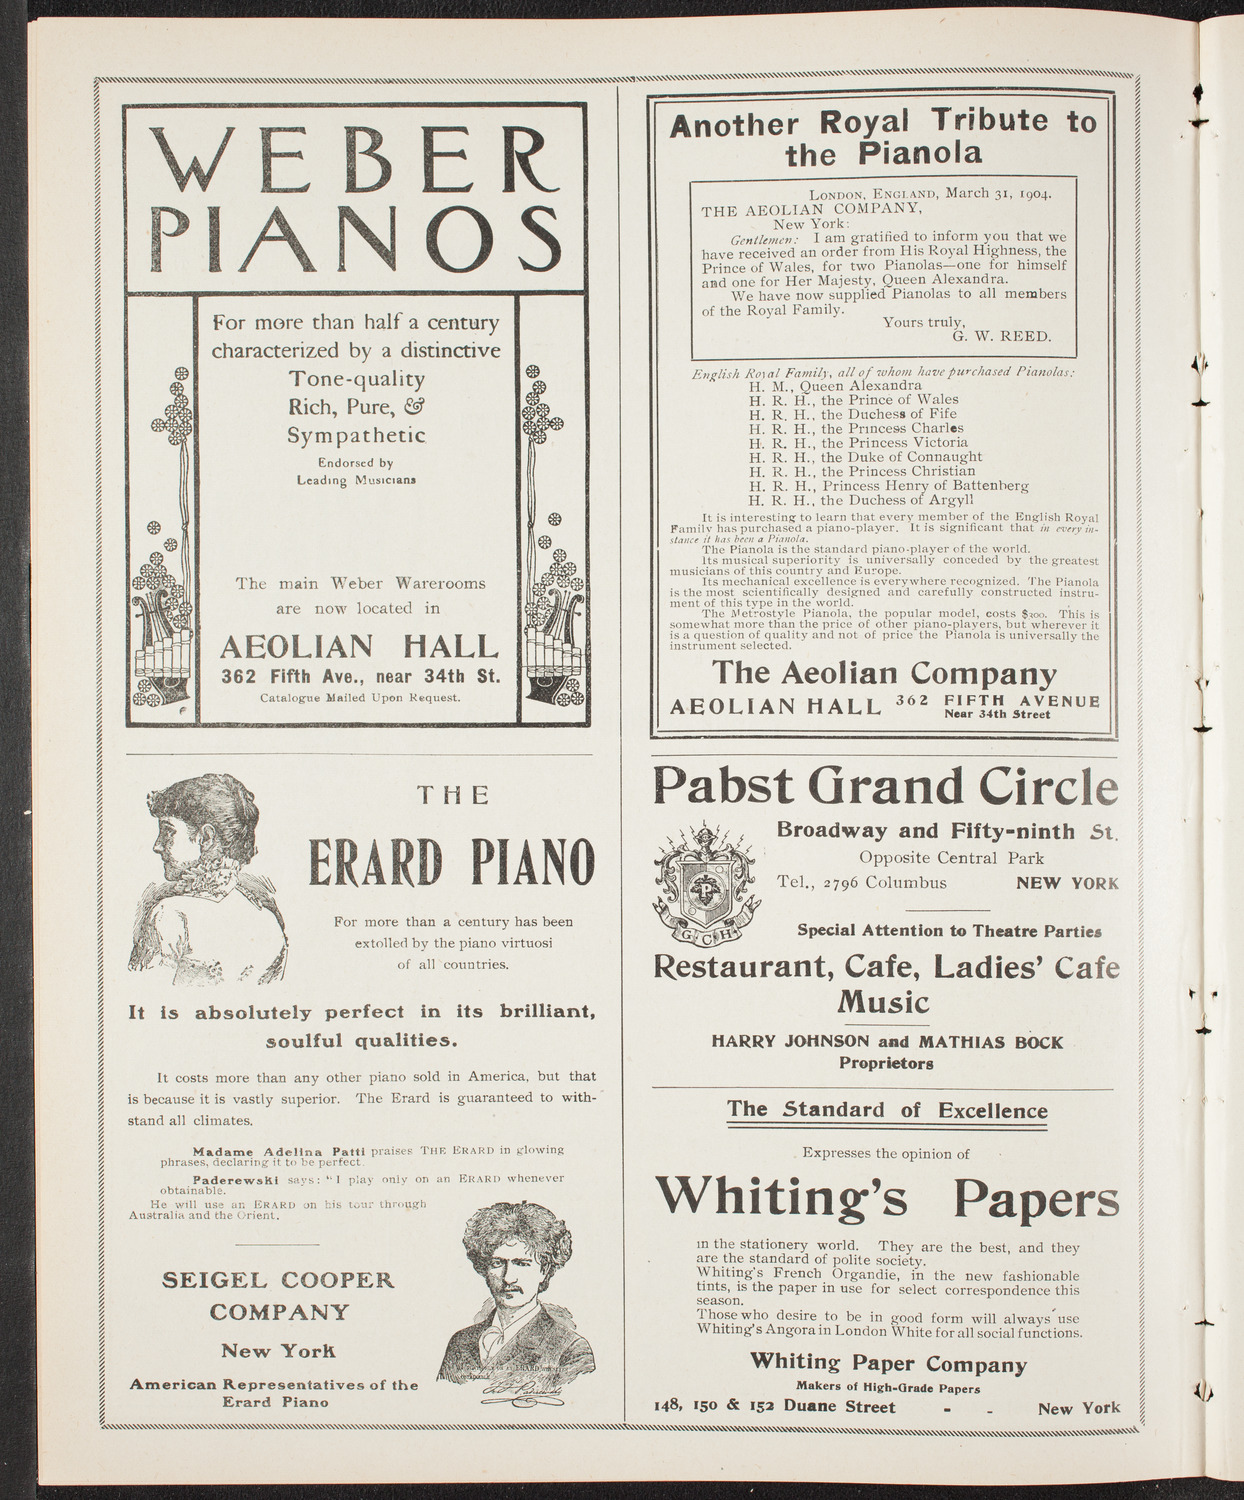 Graduation: Packard Commercial School, May 23, 1904, program page 6